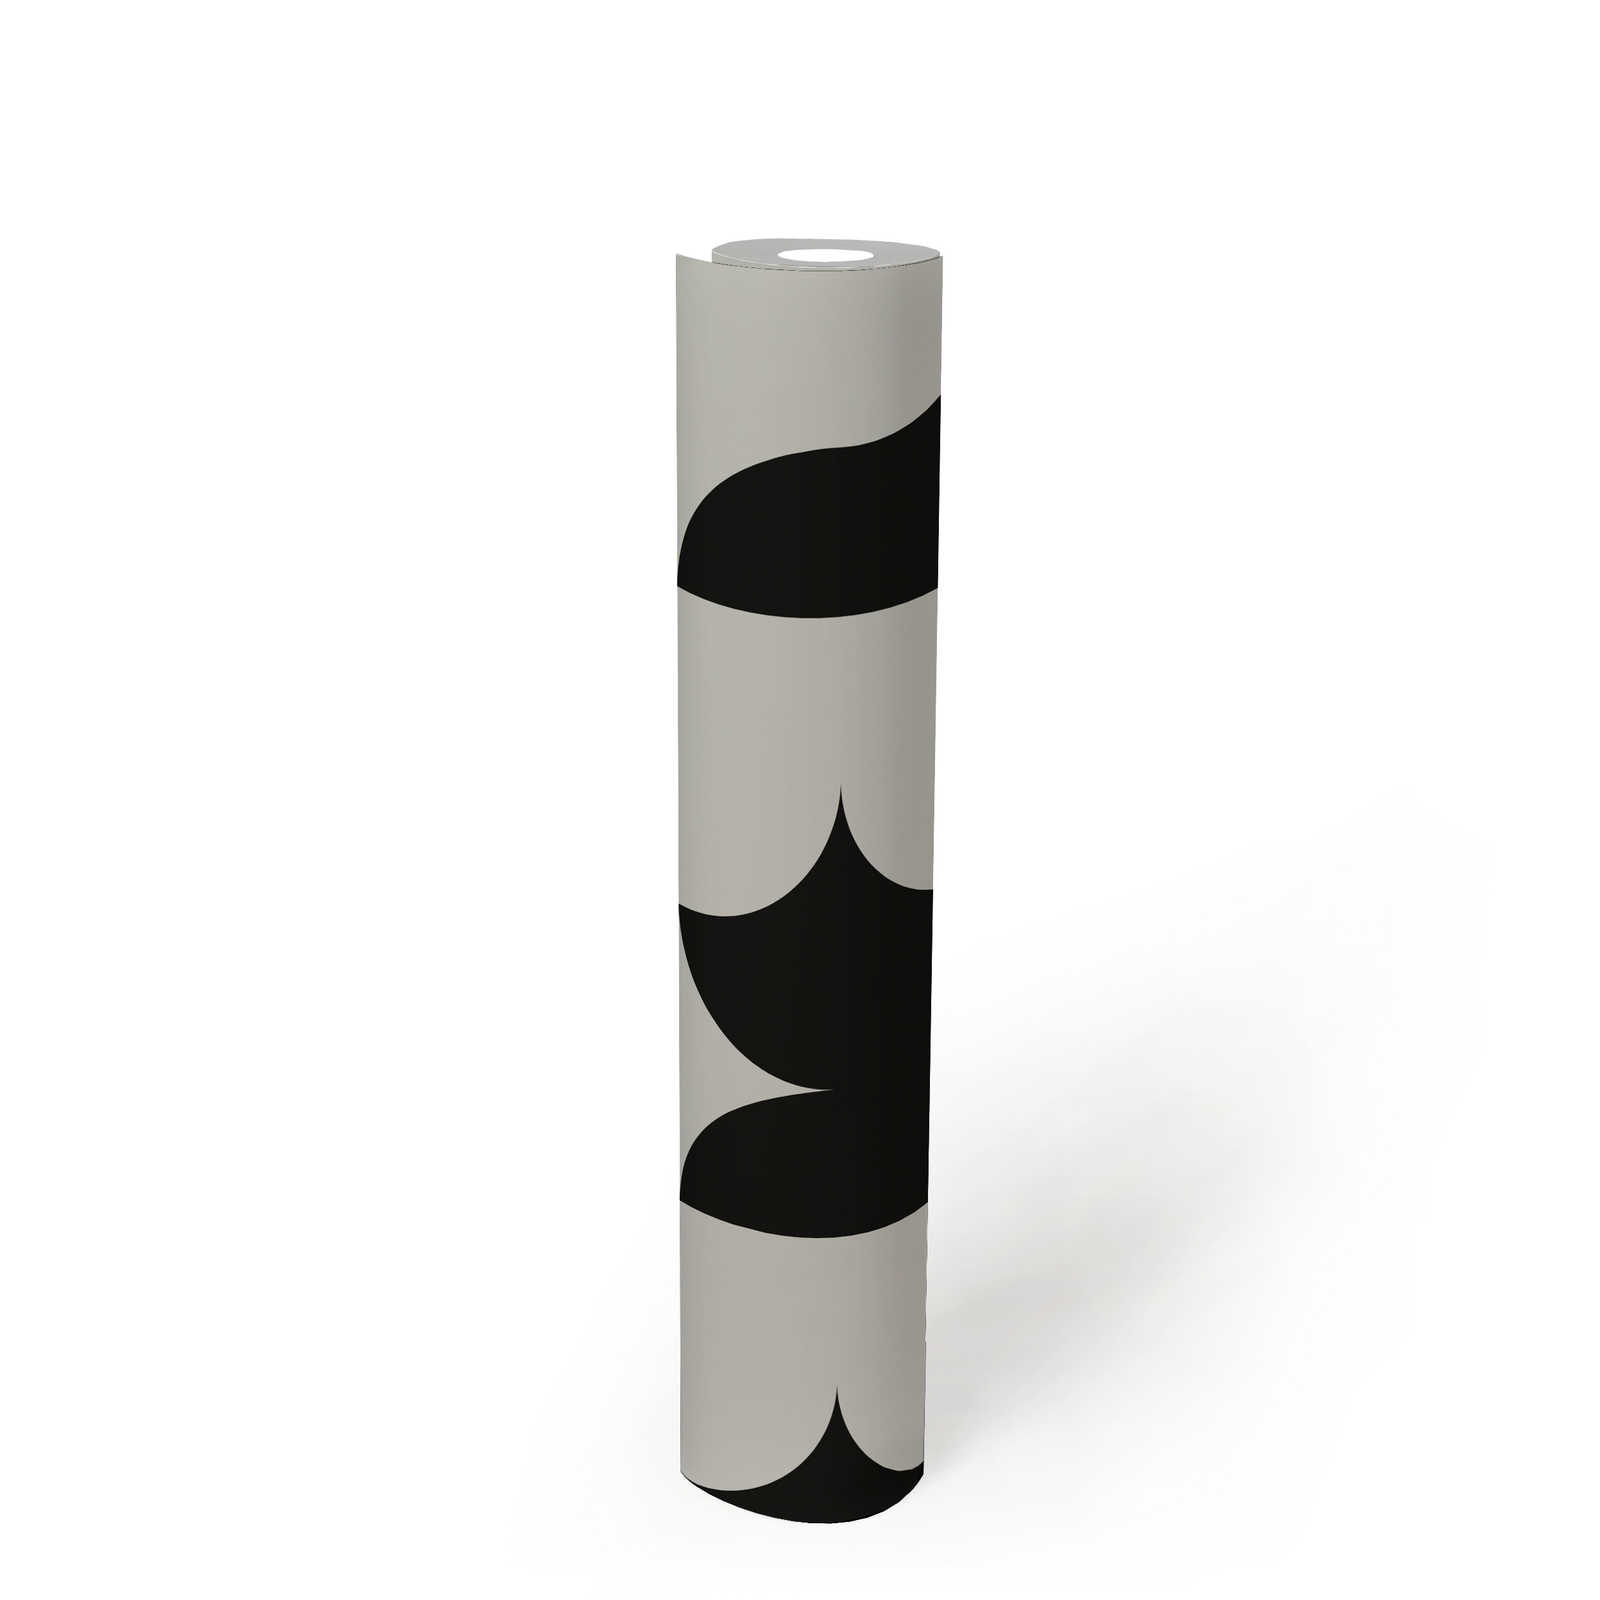             70s style retro wallpaper with graphic pattern - black and white
        